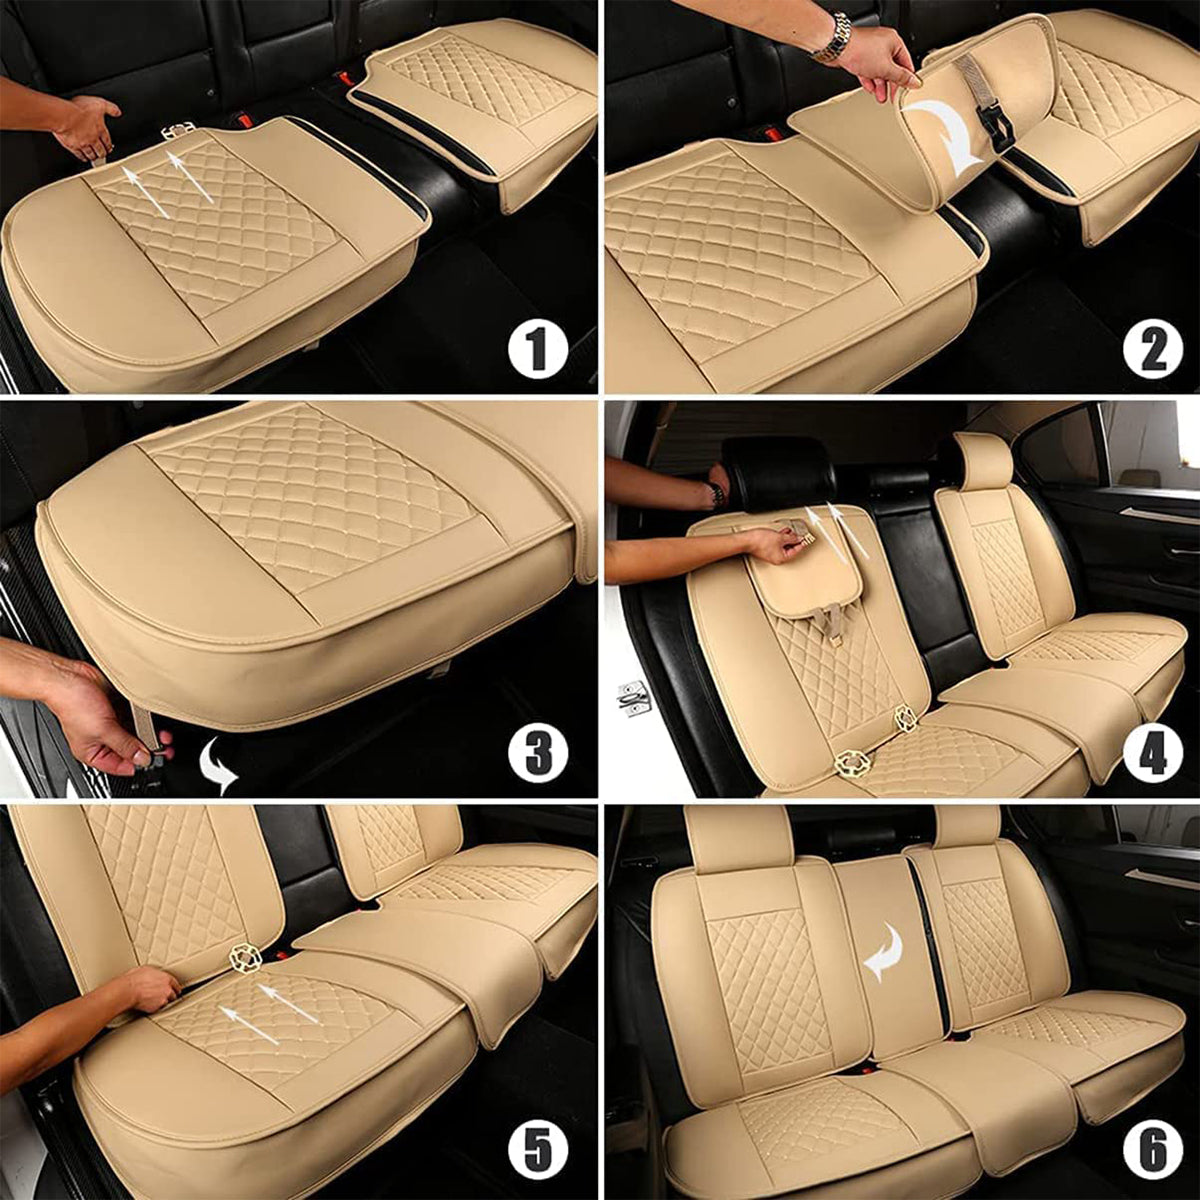 BMW Car Covers - Custom Car and Seat Covers